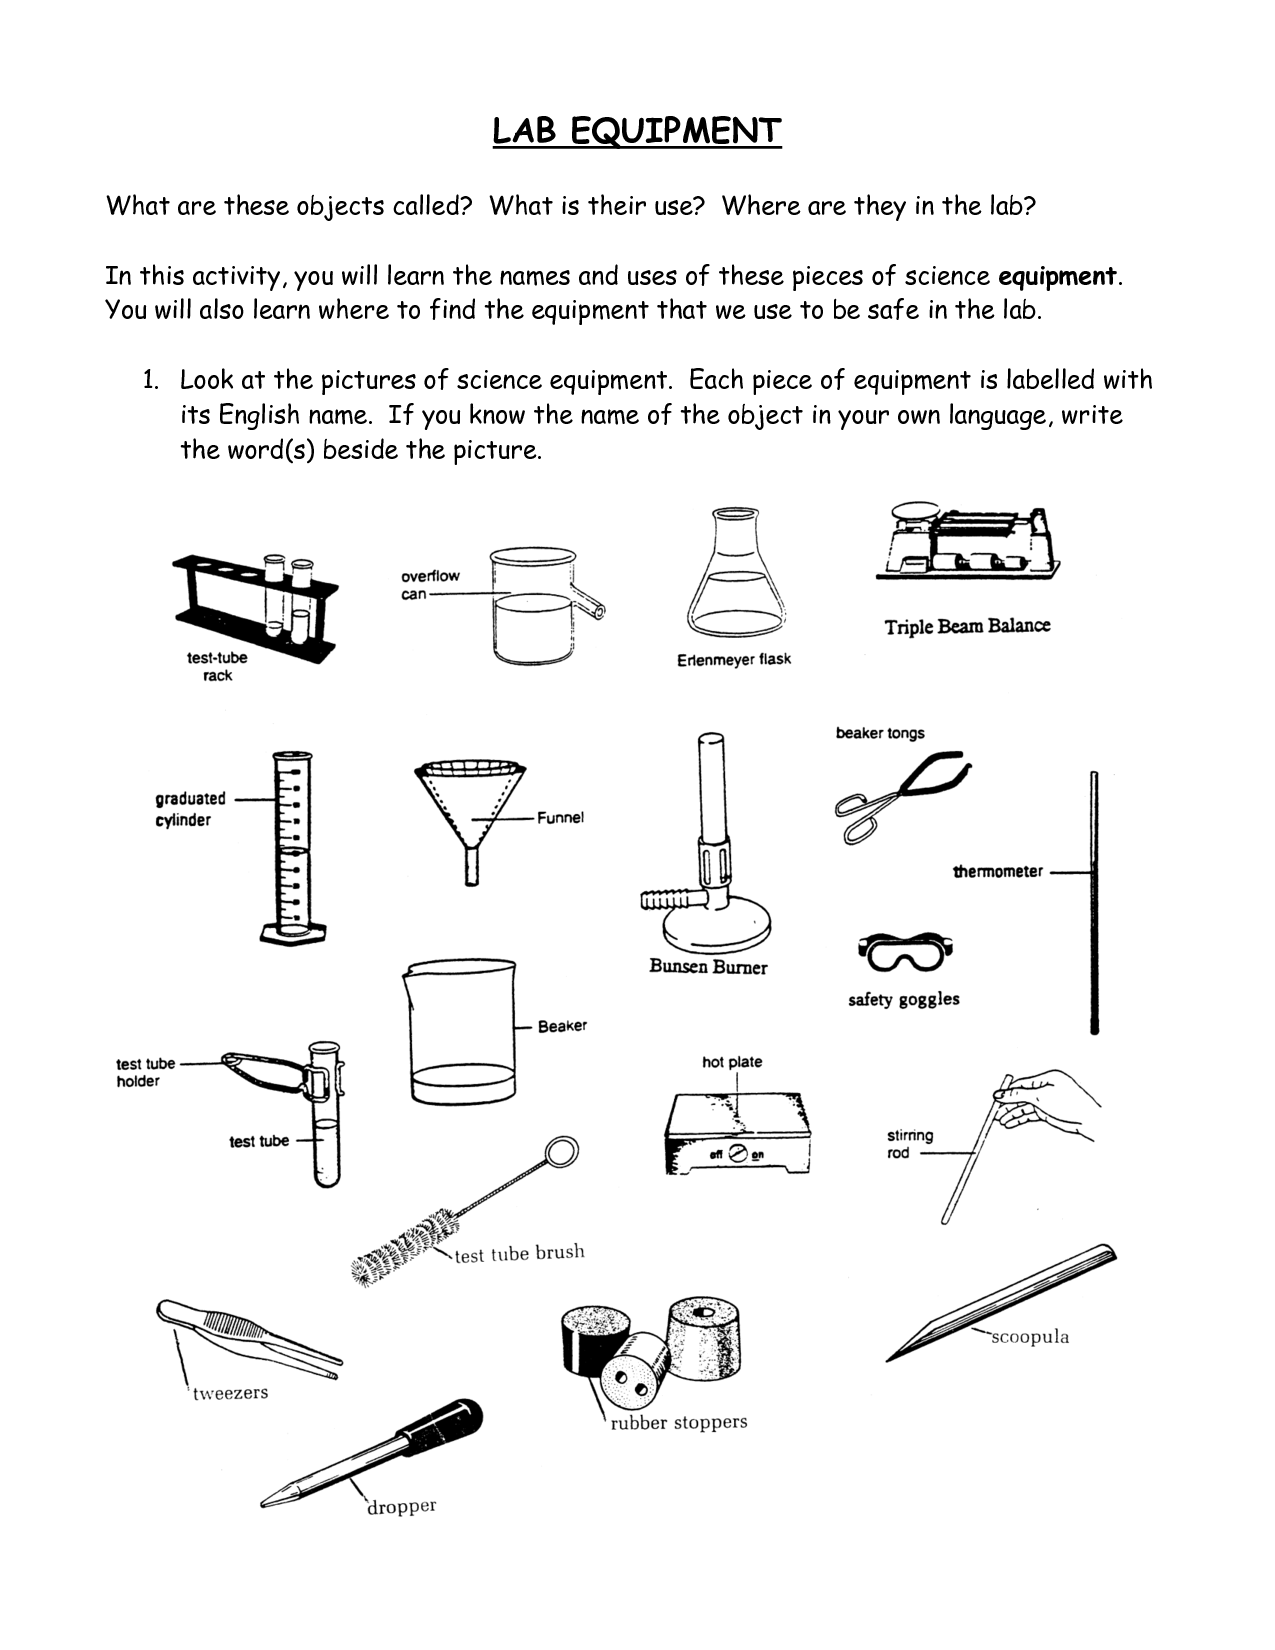 Coloring Pages Of Science Equipment - Coloring